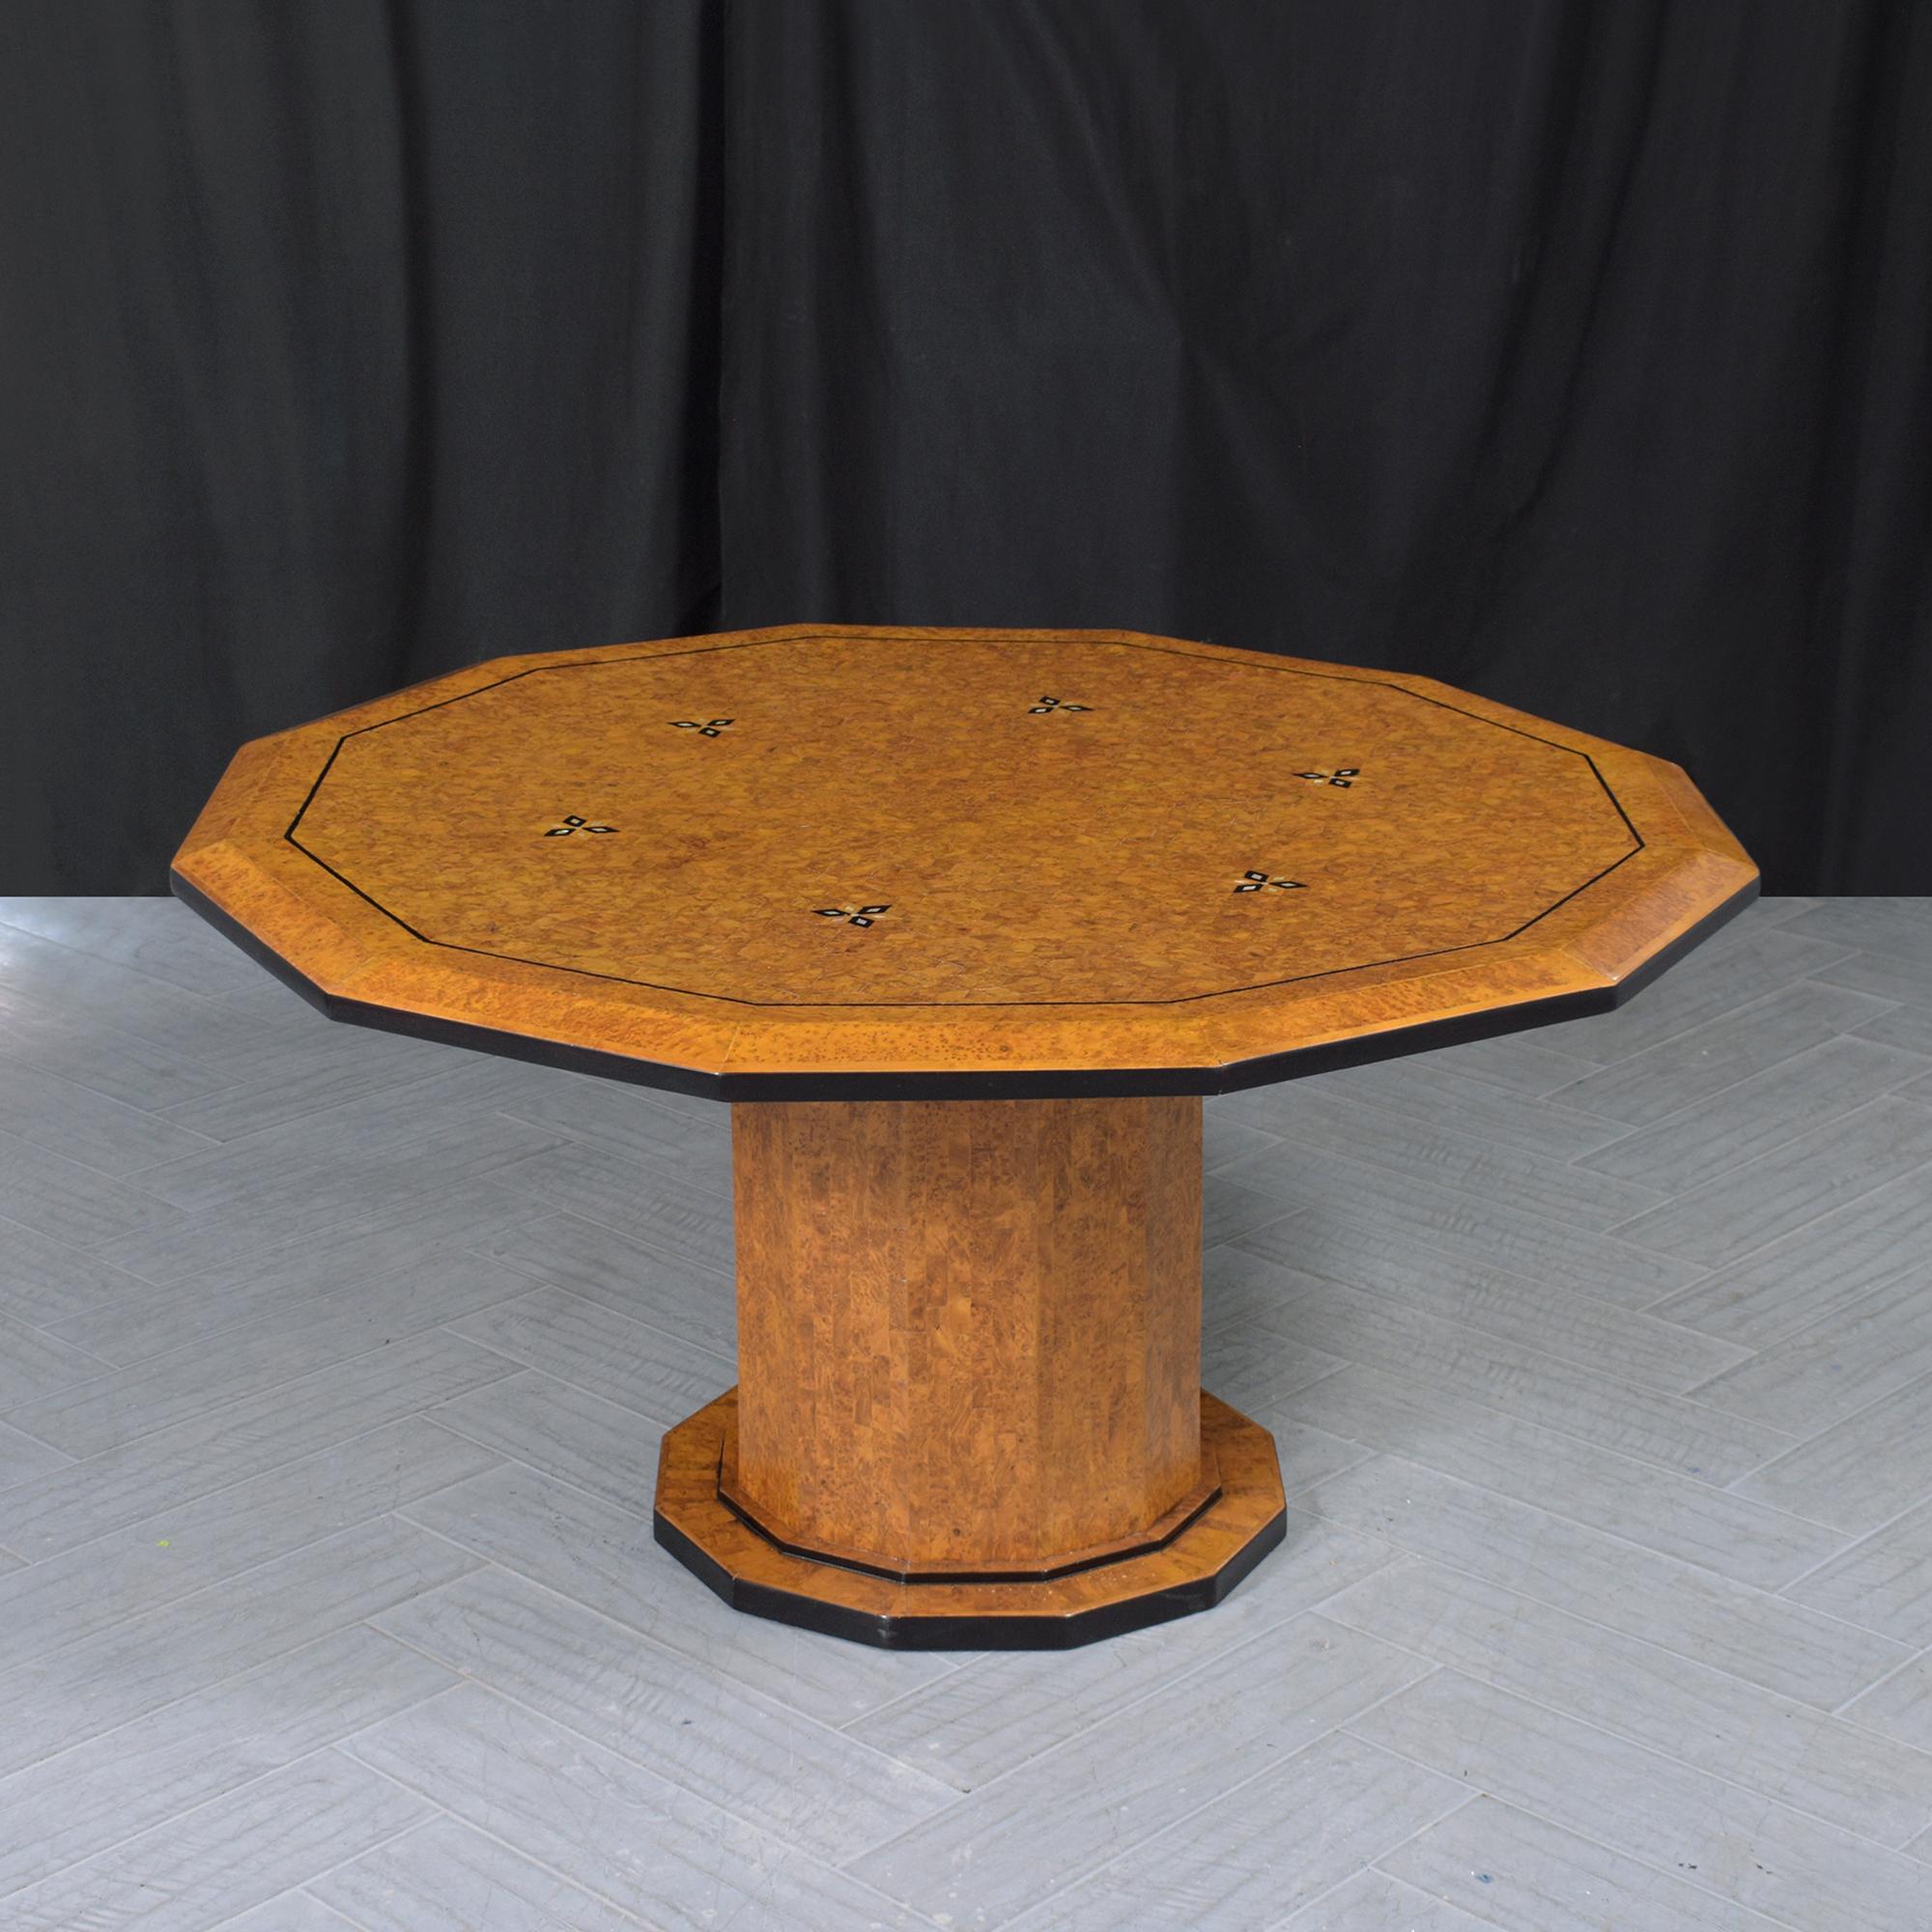 Baroque 1880s Restored Walnut Veneer Center Table with Mother-of-Pearl Inlays For Sale